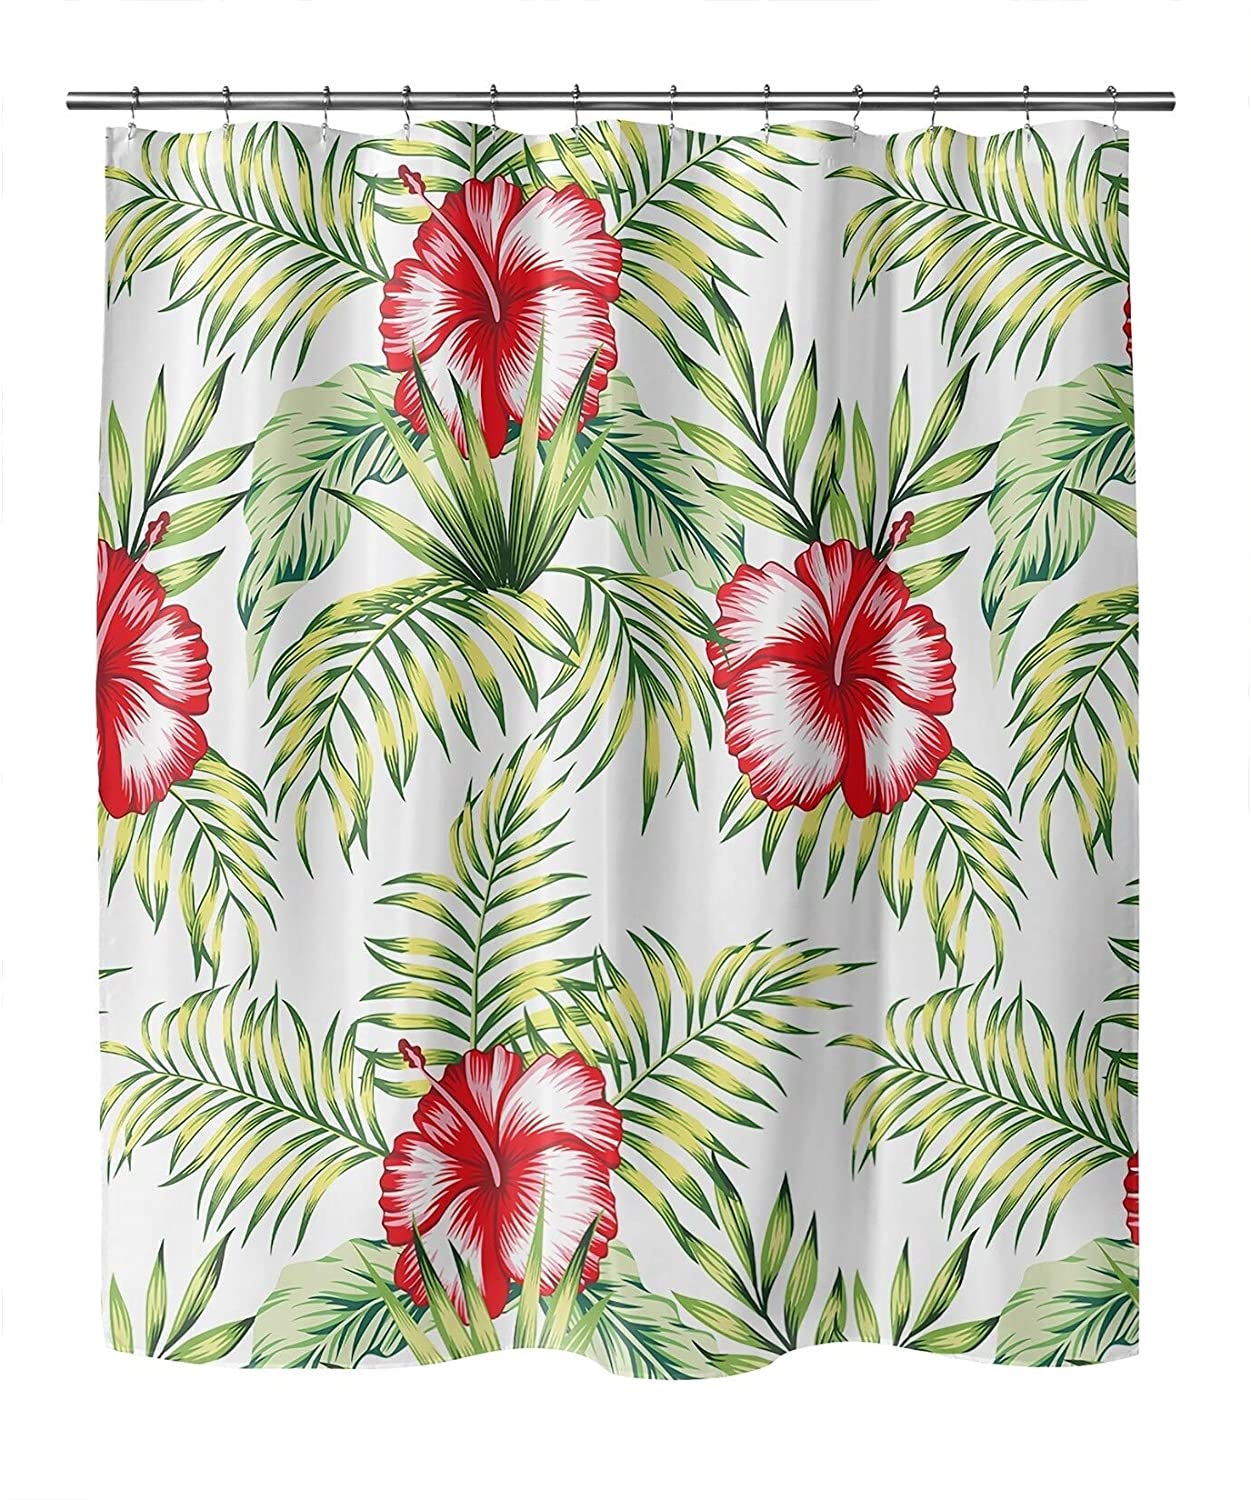 MISC Tropical Botanical Hibiscus Shower Curtain by 71x74 Green Floral Tropical Polyester